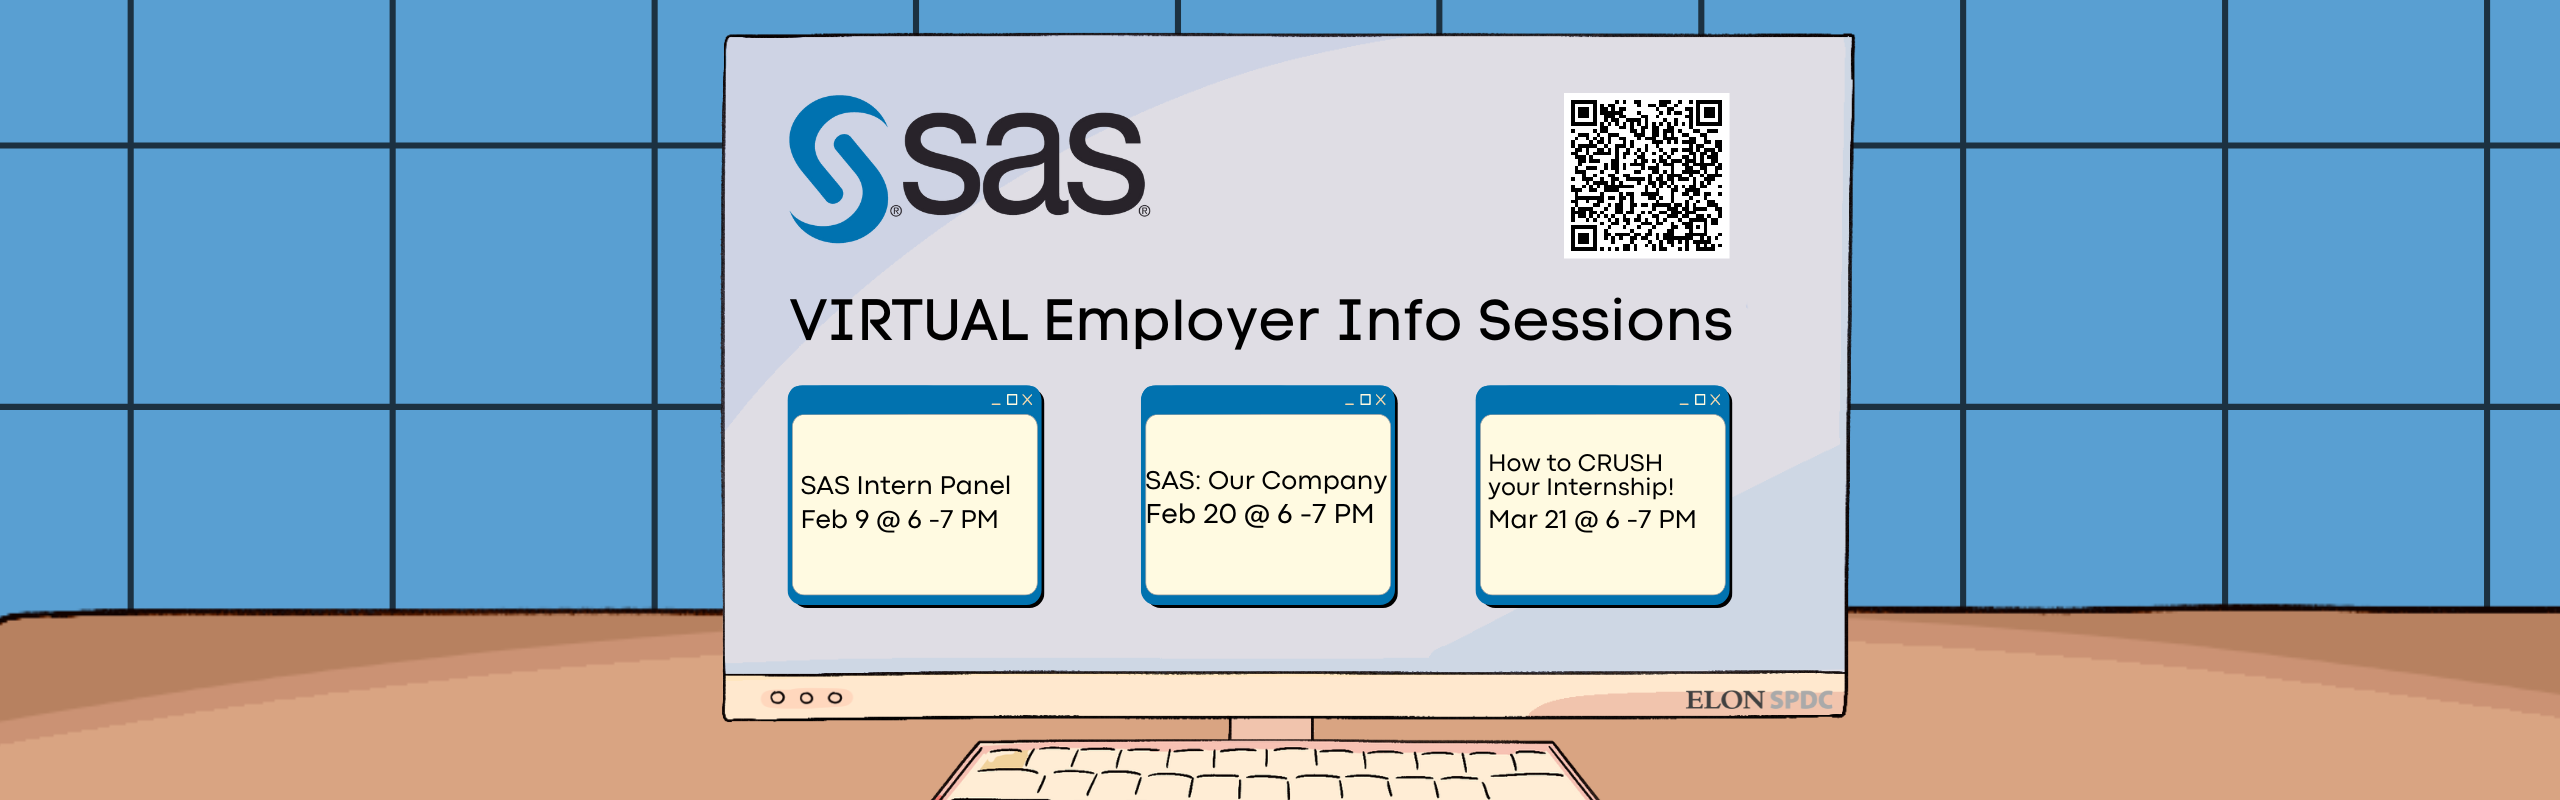 SAS SOftware Analytics info session march 21t at 6PM review EJN for more details